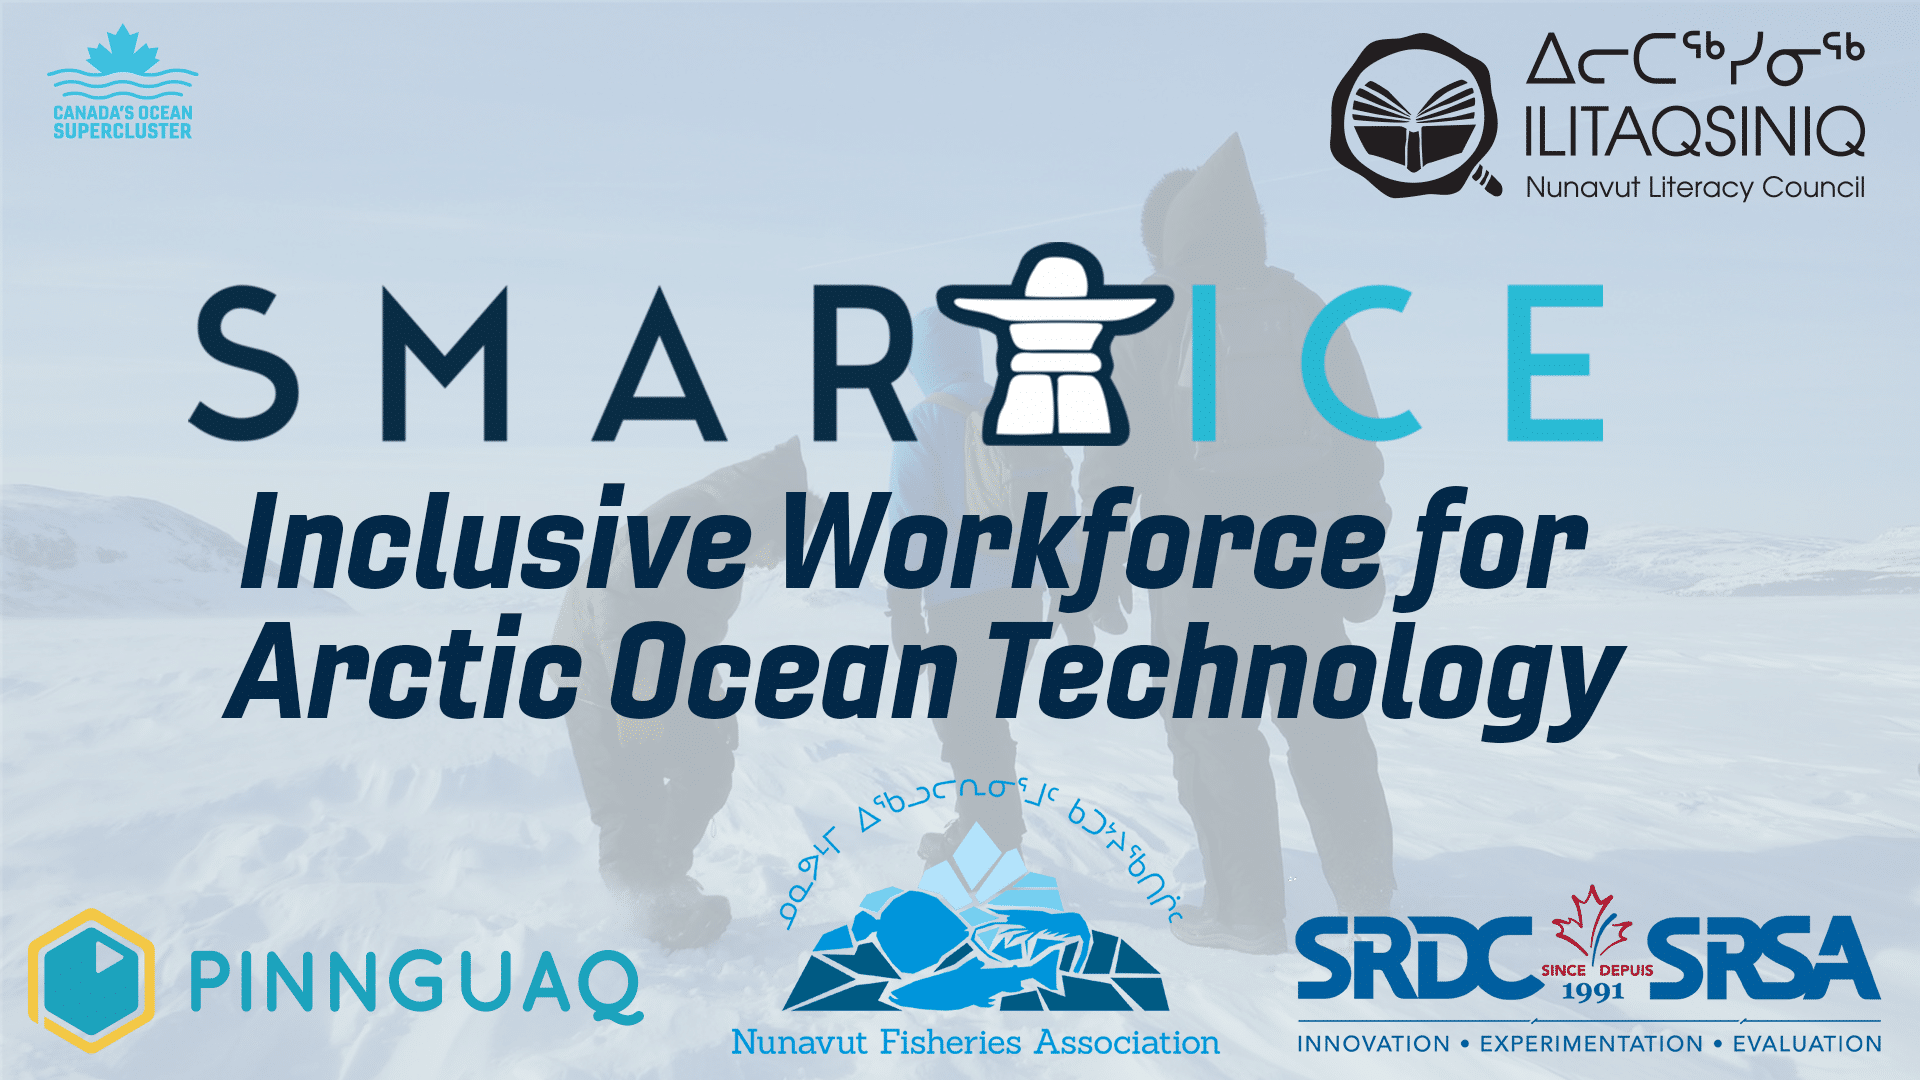 The Inclusive Workforce for Arctic Ocean Technology Project is an ecosystem building project designed to develop technical skills training for Inuit participants across Inuit Nunangat. This project is designed to develop technical skills training for Inuit participants across Inuit Nunangat.